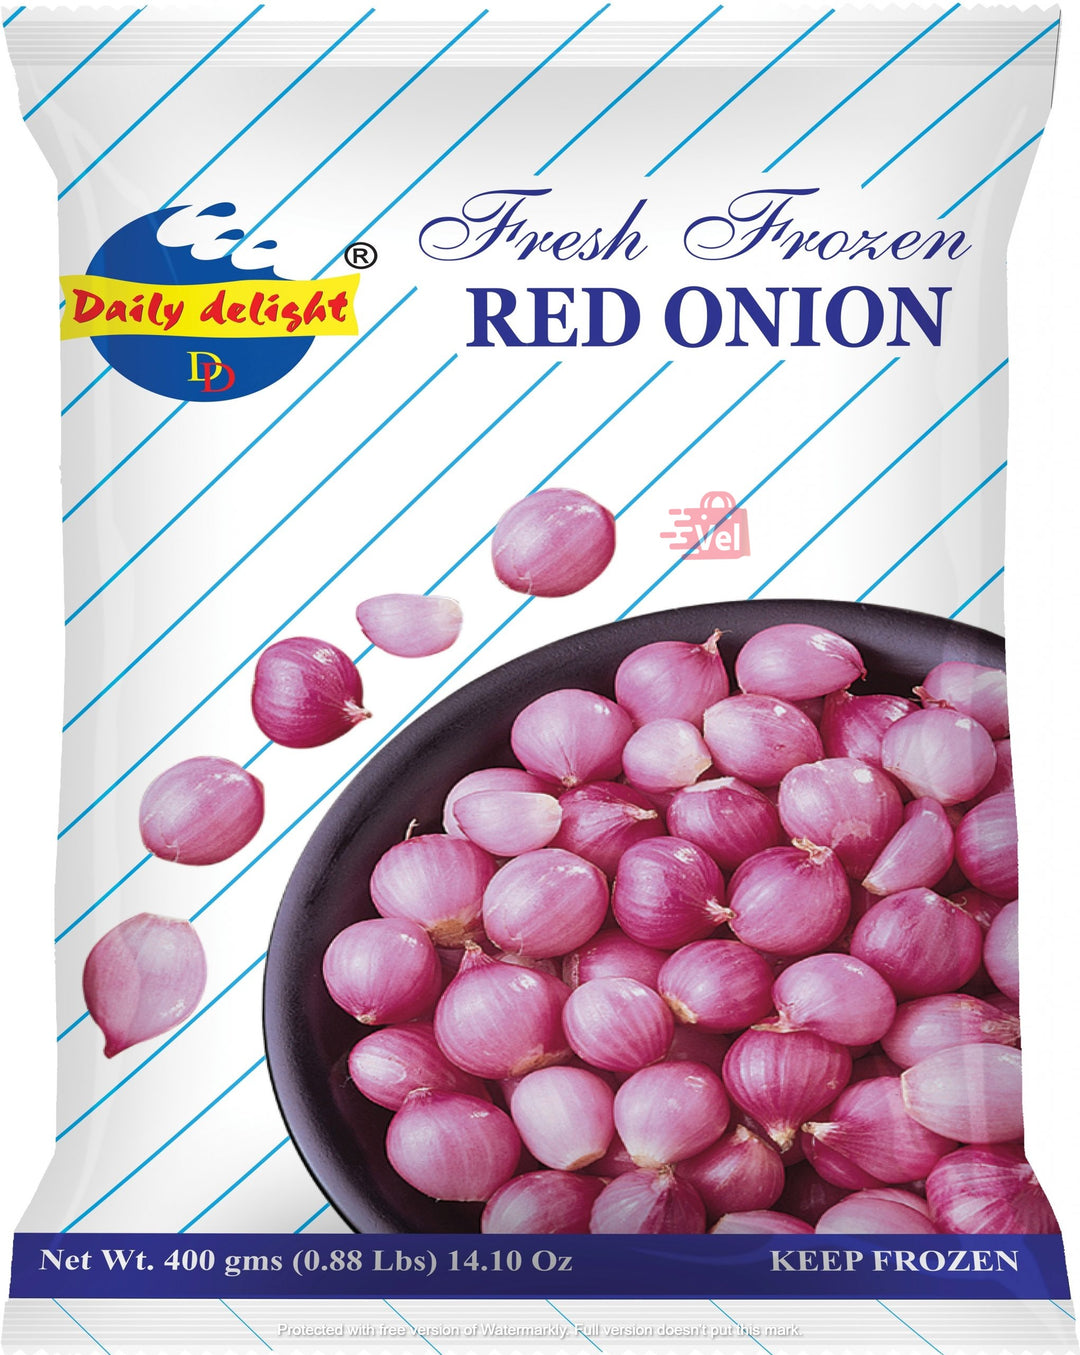 Daily Delight Red Onion 454G 2